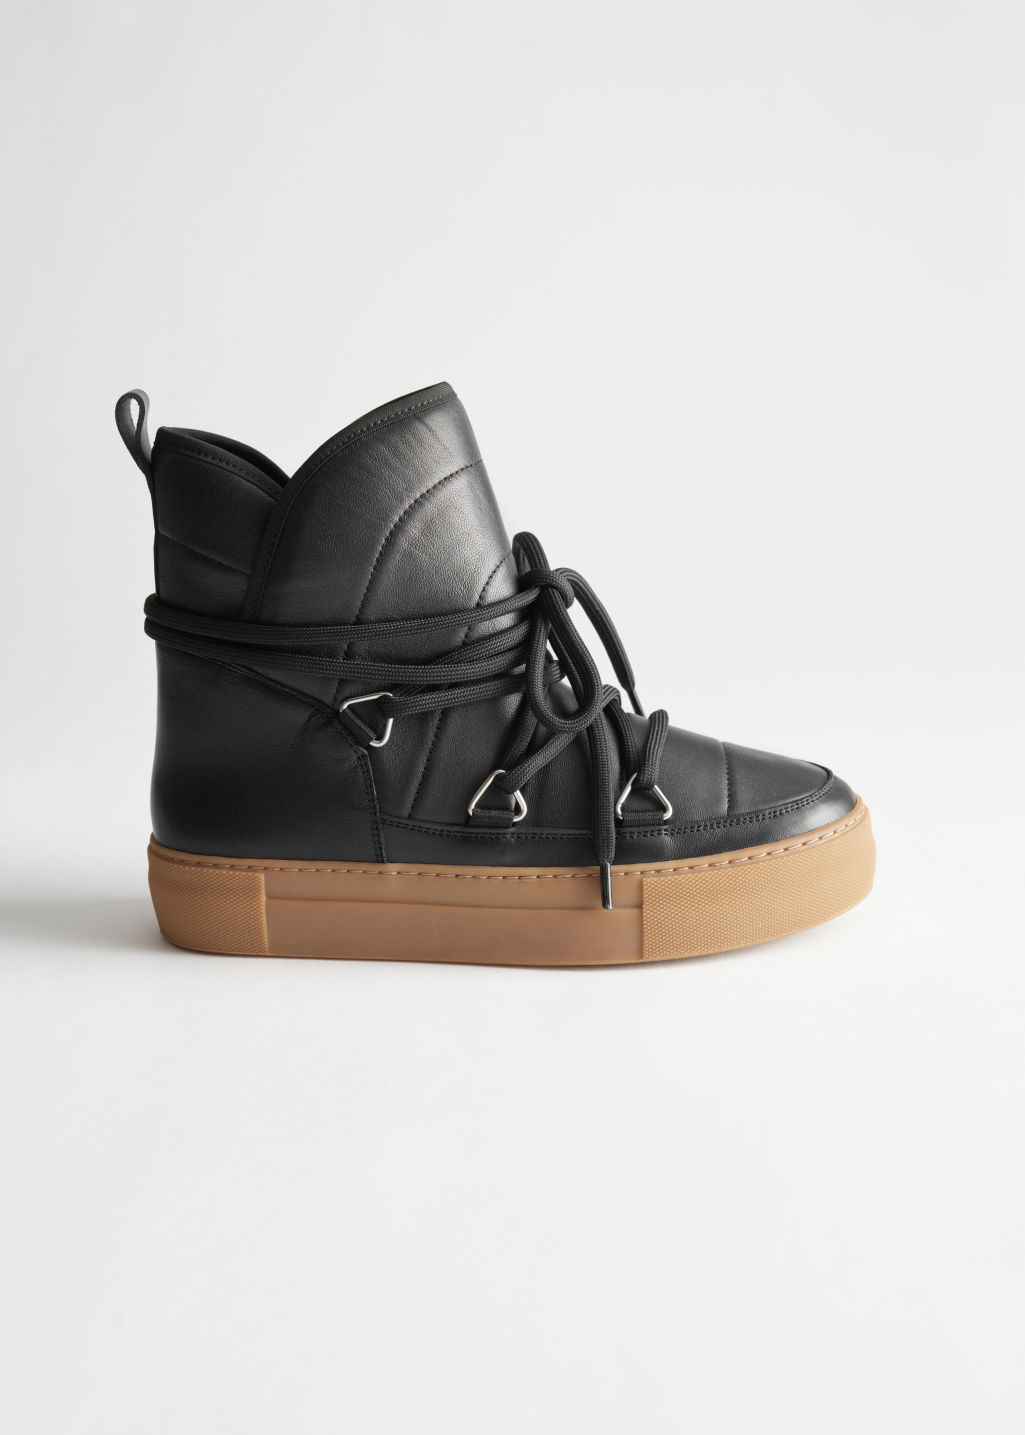 Shearling Lined Leather Snow Boots - Black - Winterboots - & Other Stories